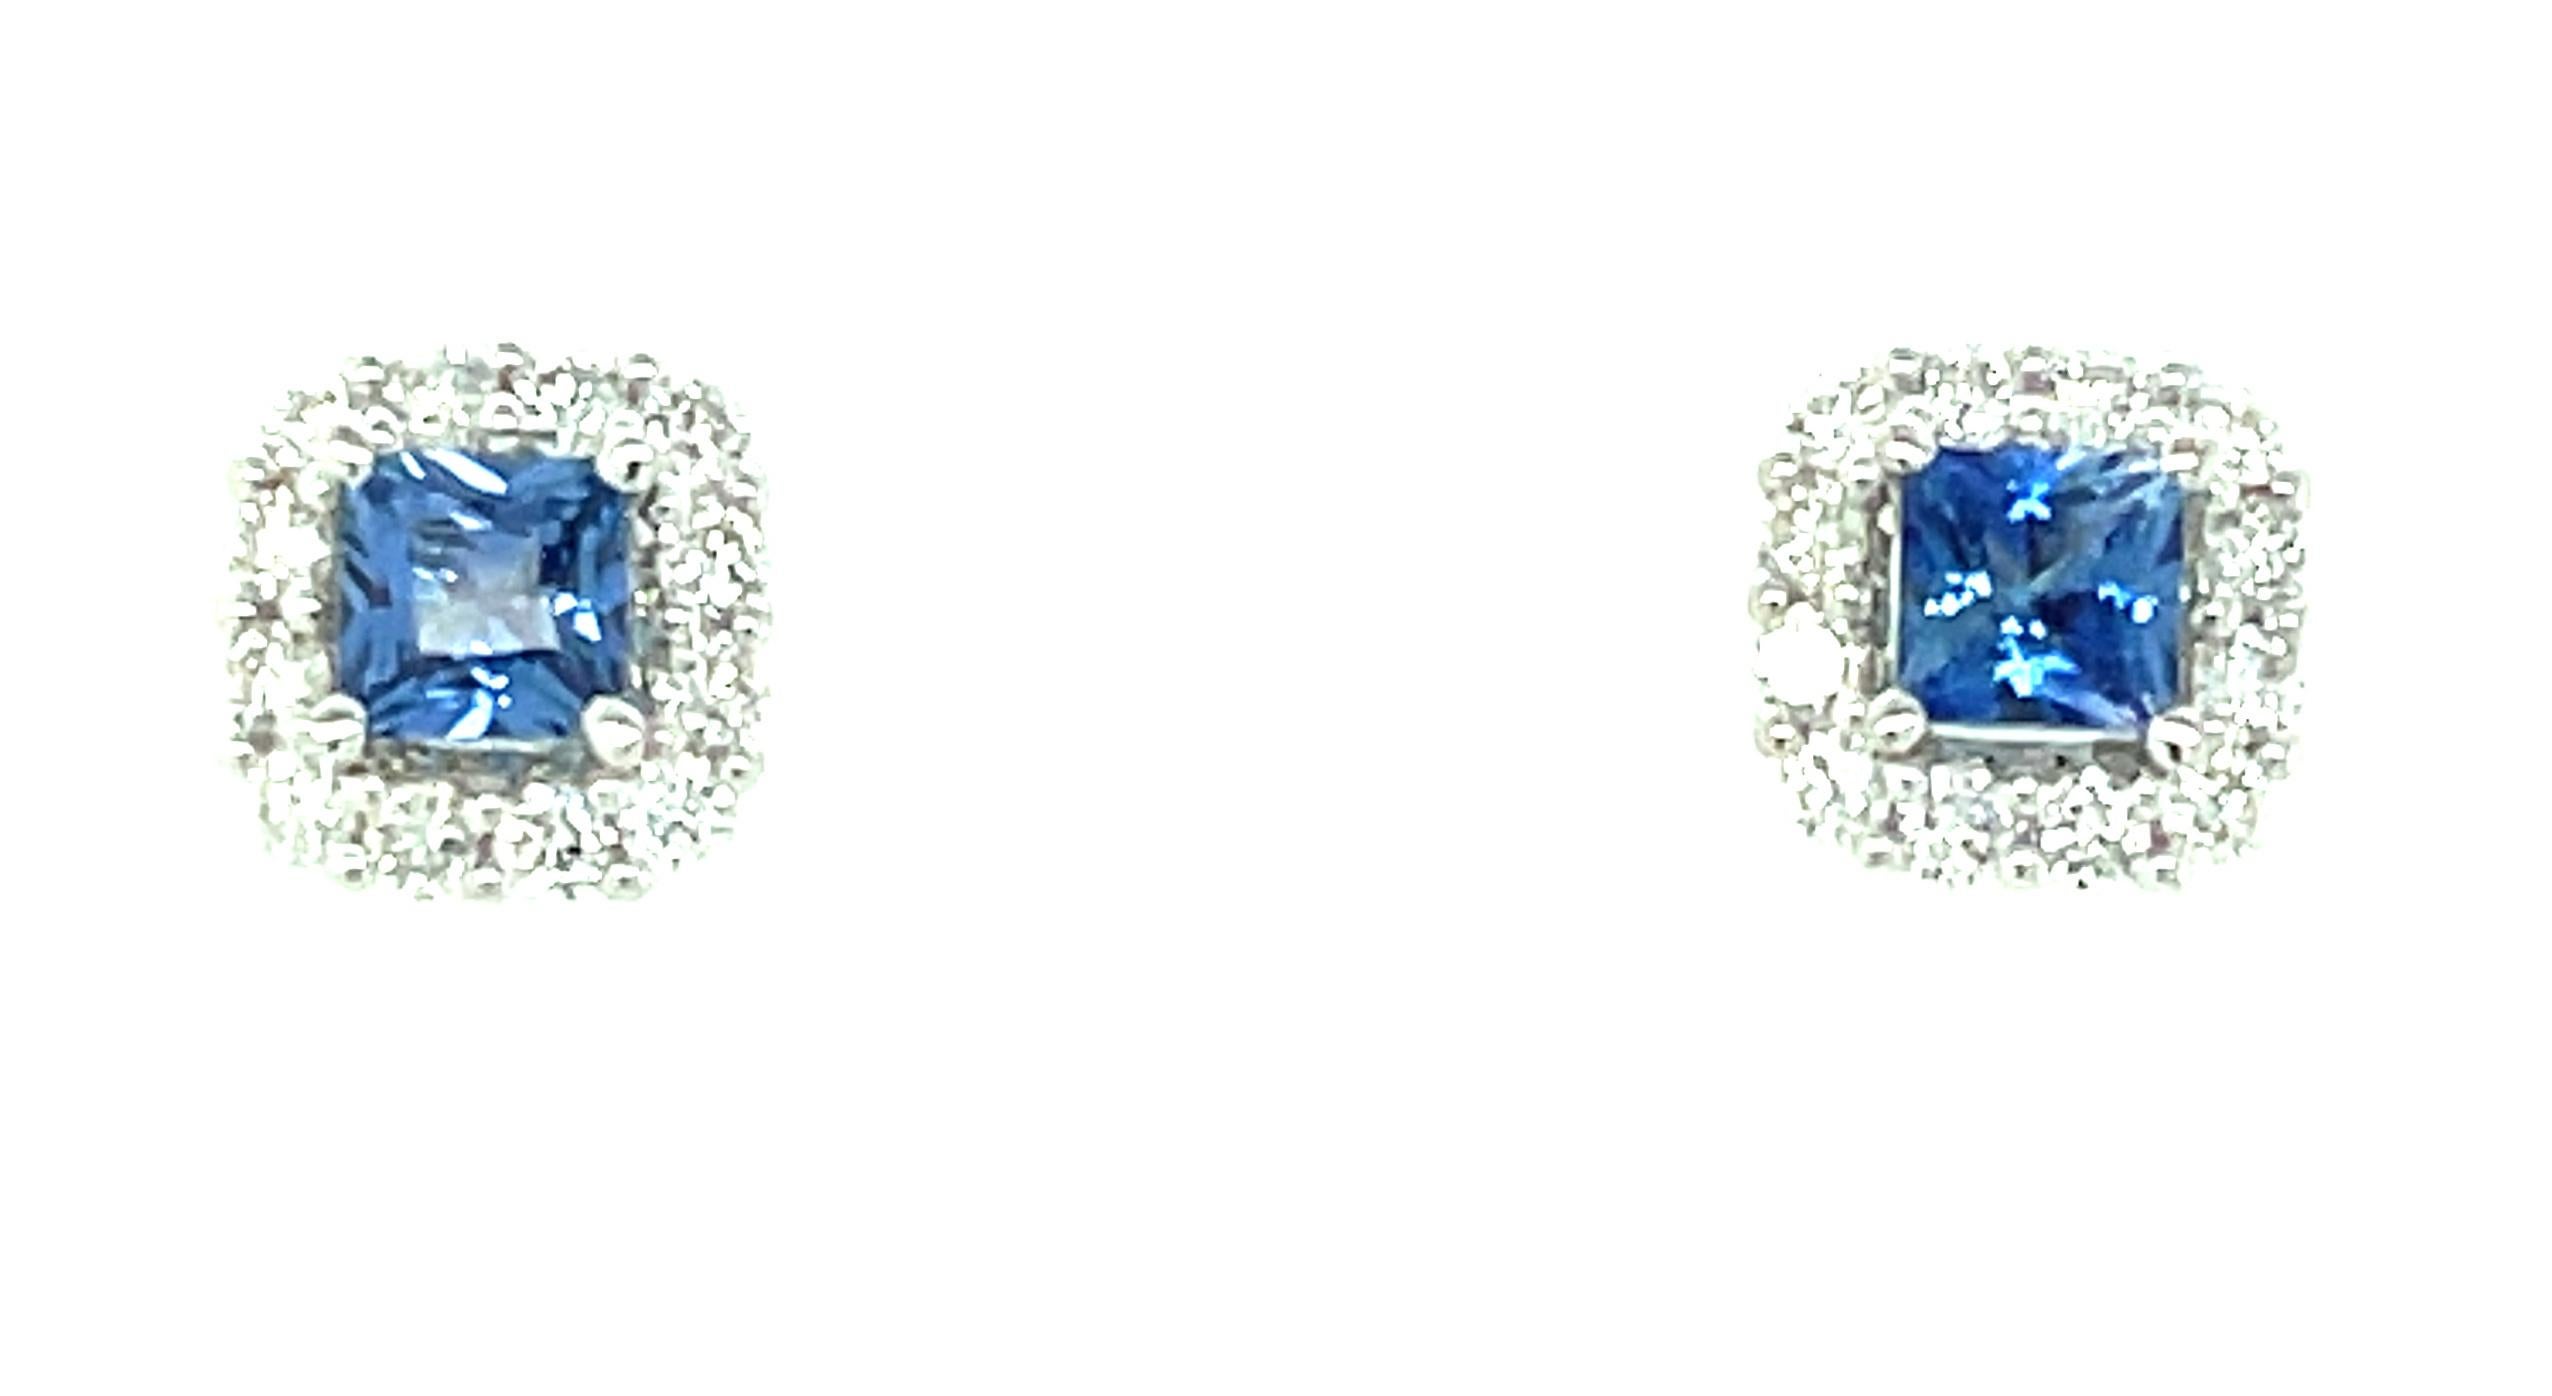 These gorgeous blue sapphire and diamond 18k white gold stud earrings give a modern look to a timeless classic! The blue sapphire center stones have rich, cornflower blue color and are framed by pave-set brilliant white diamonds. These are perfect